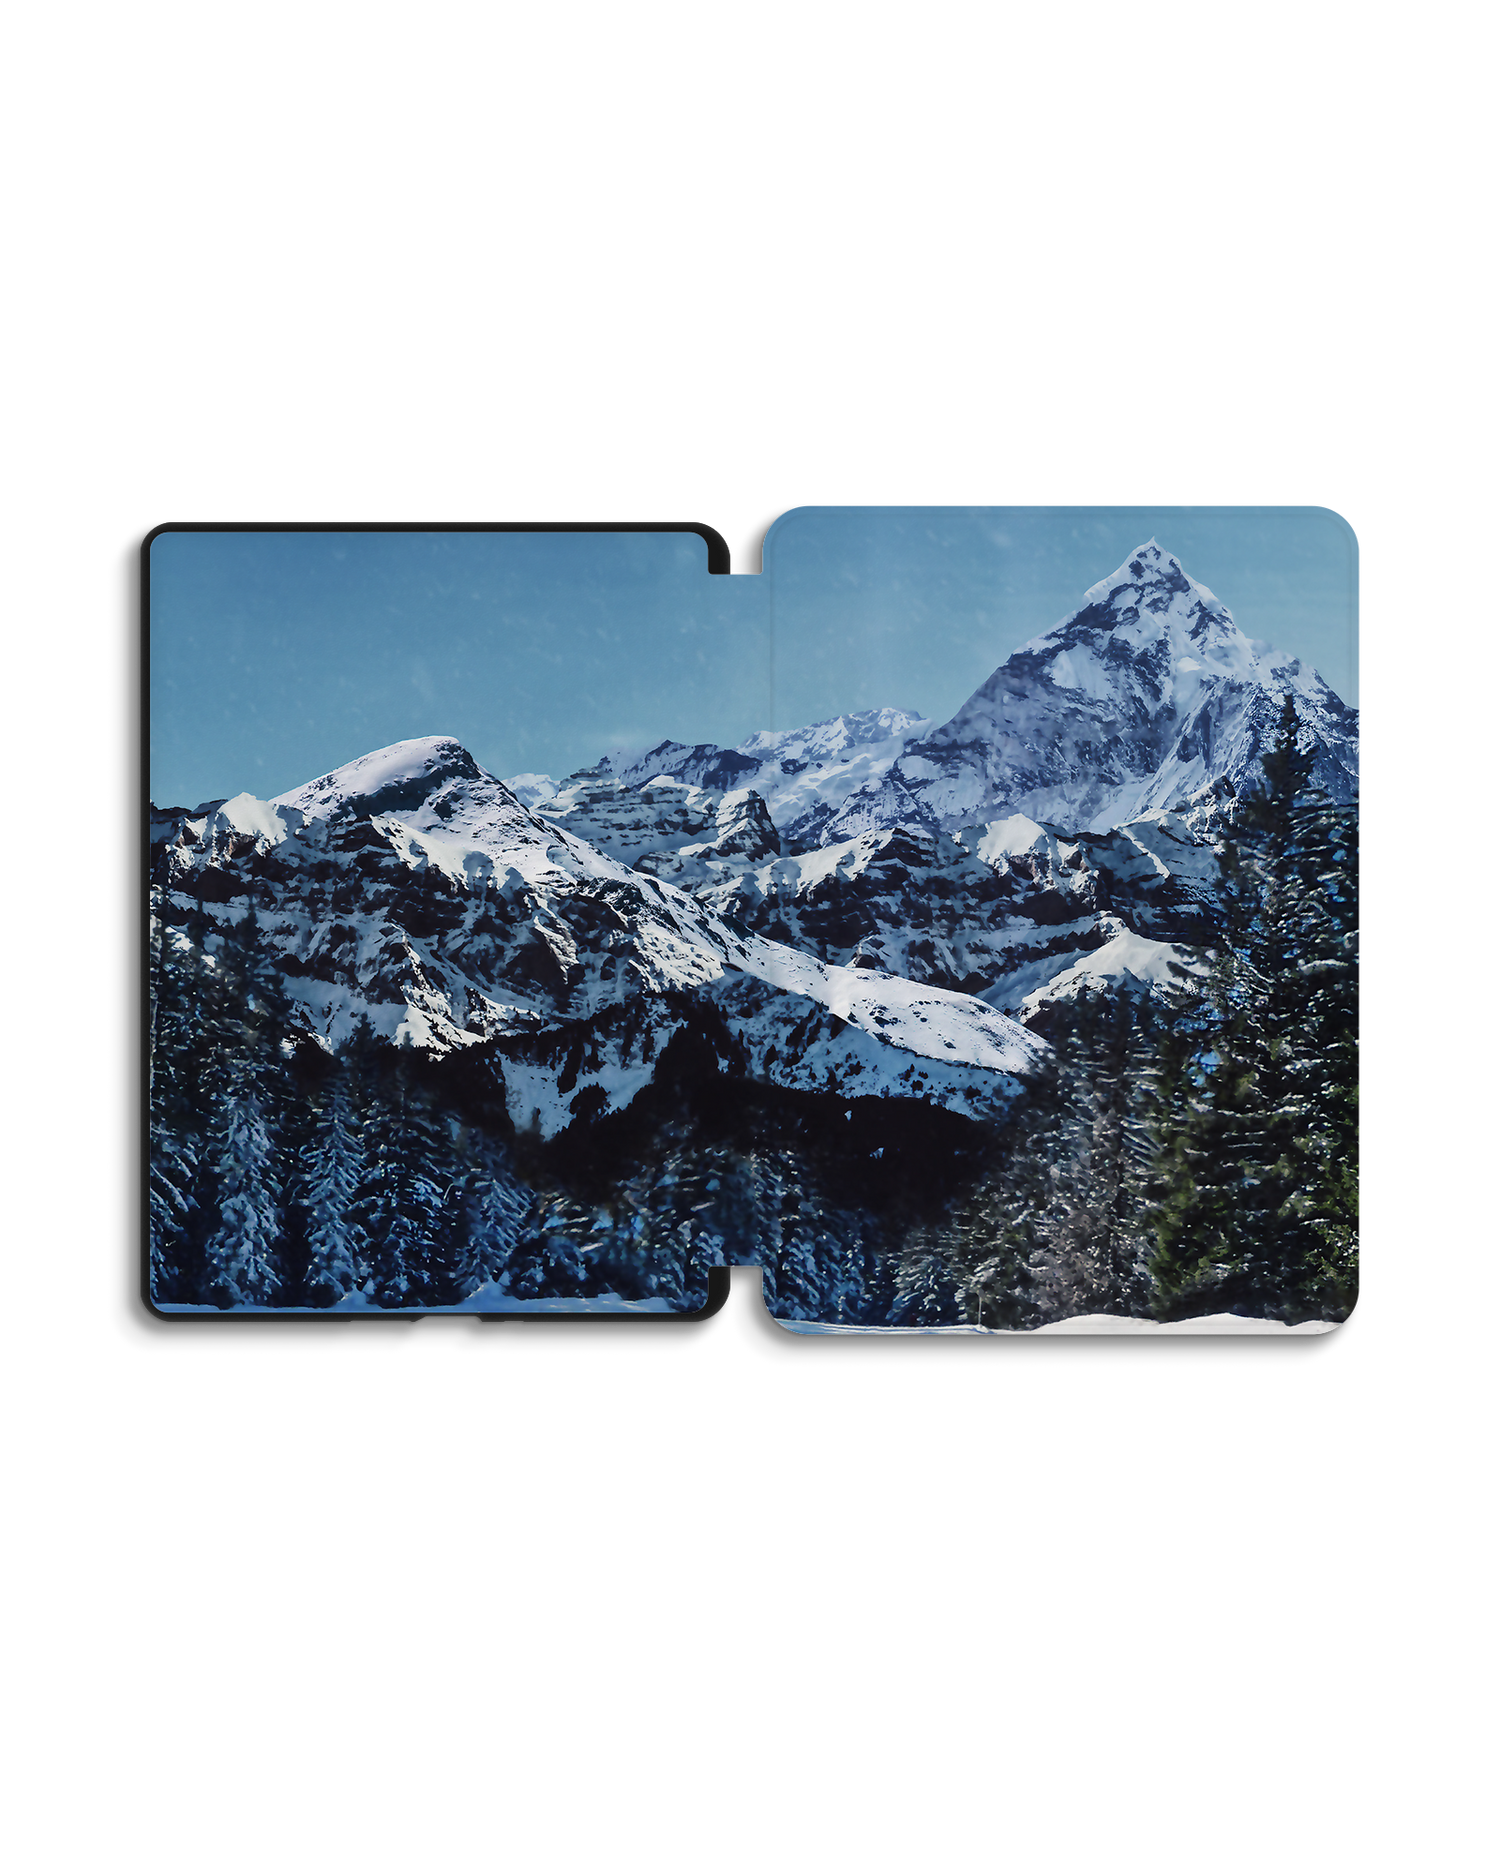 Winter Landscape eReader Smart Case for Amazon Kindle Paperwhite 5 (2021), Amazon Kindle Paperwhite 5 Signature Edition (2021): Opened exterior view